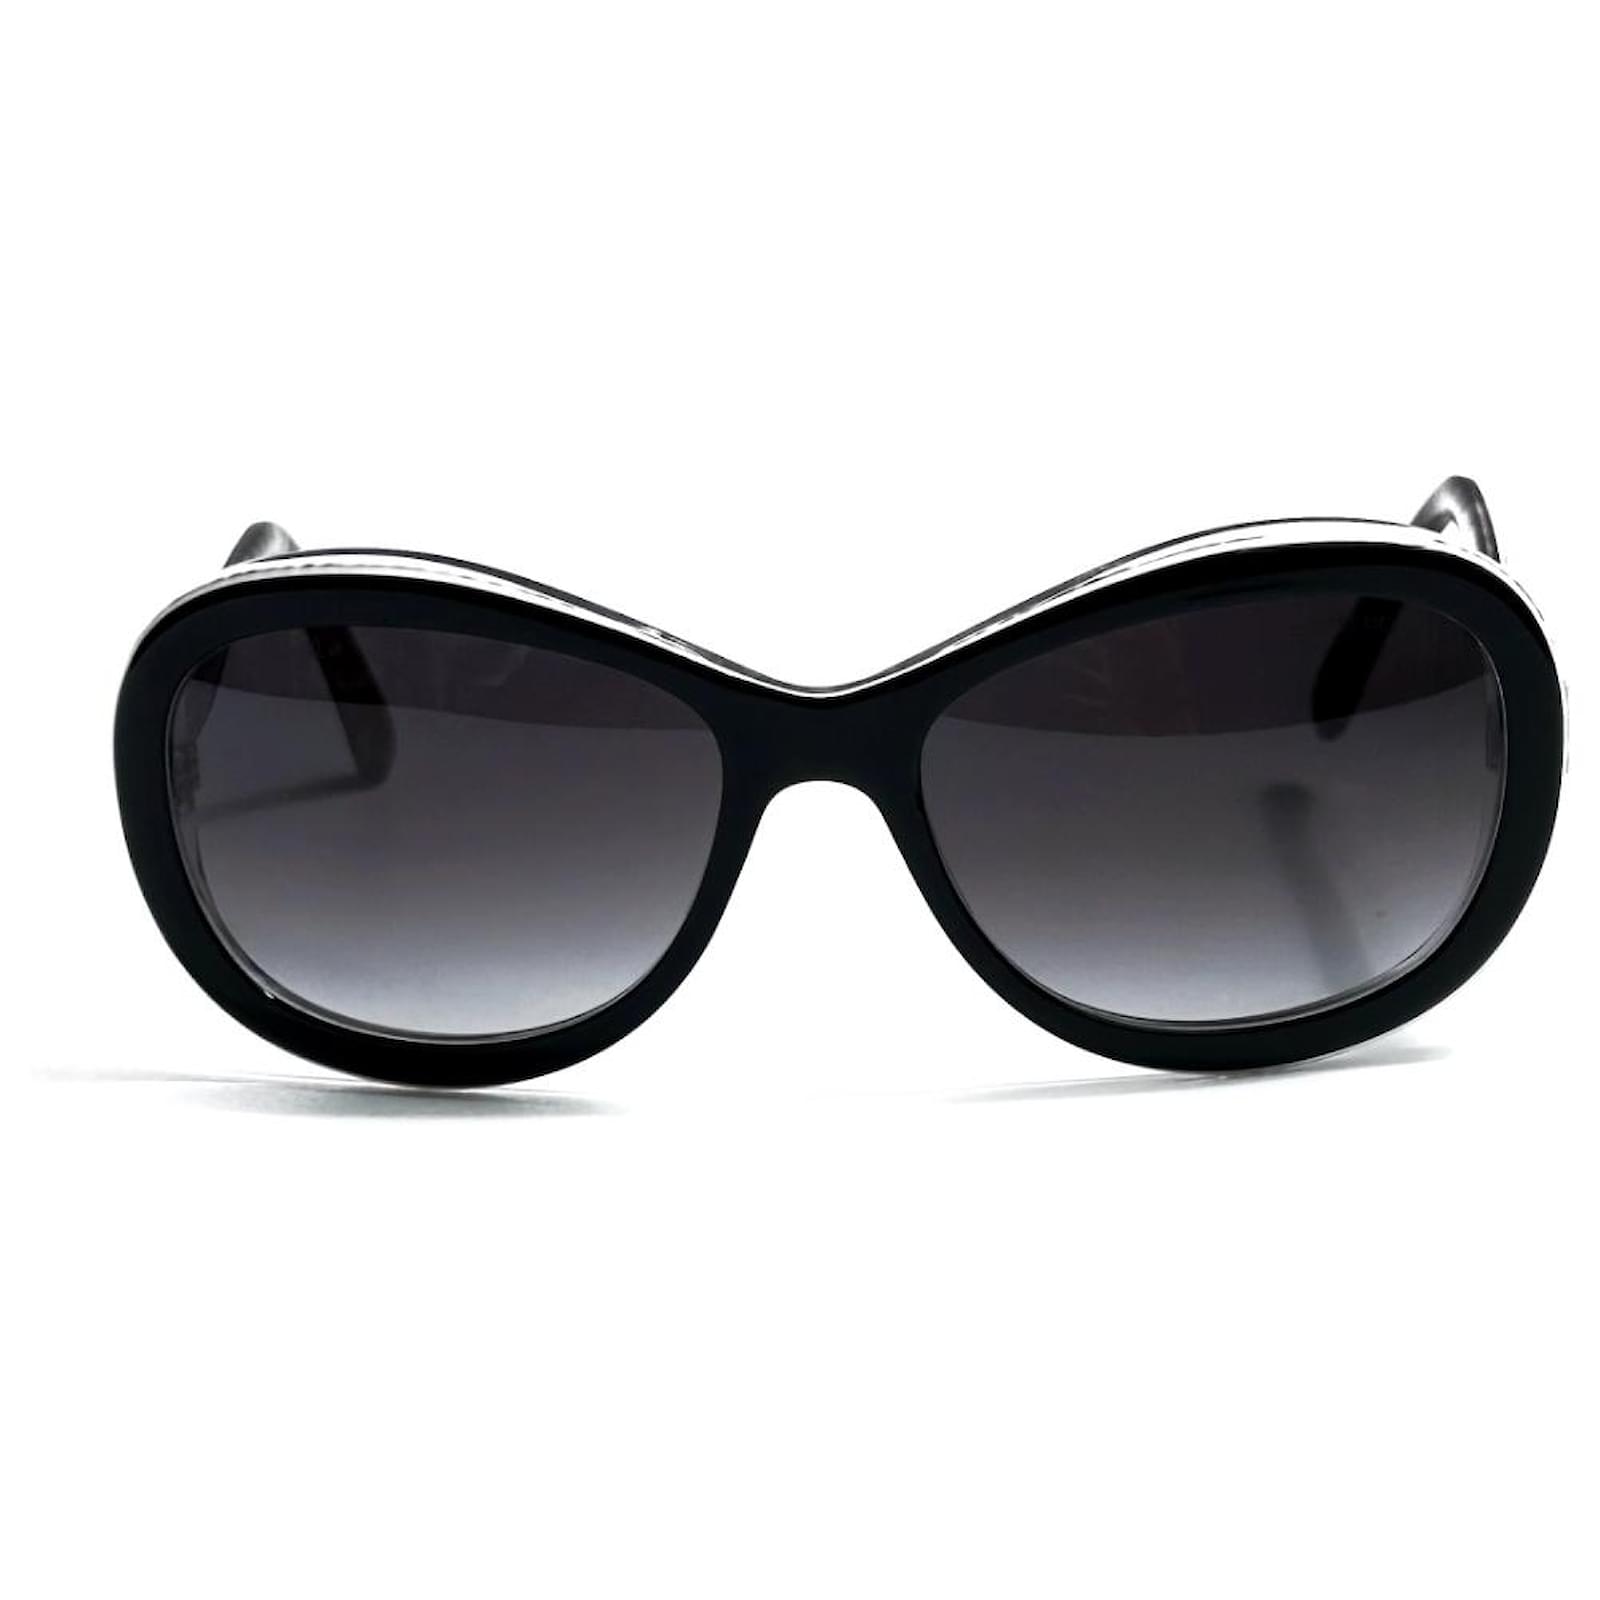 Chanel New Sunglasses CH 5219 1313/3P Womens and 50 similar items